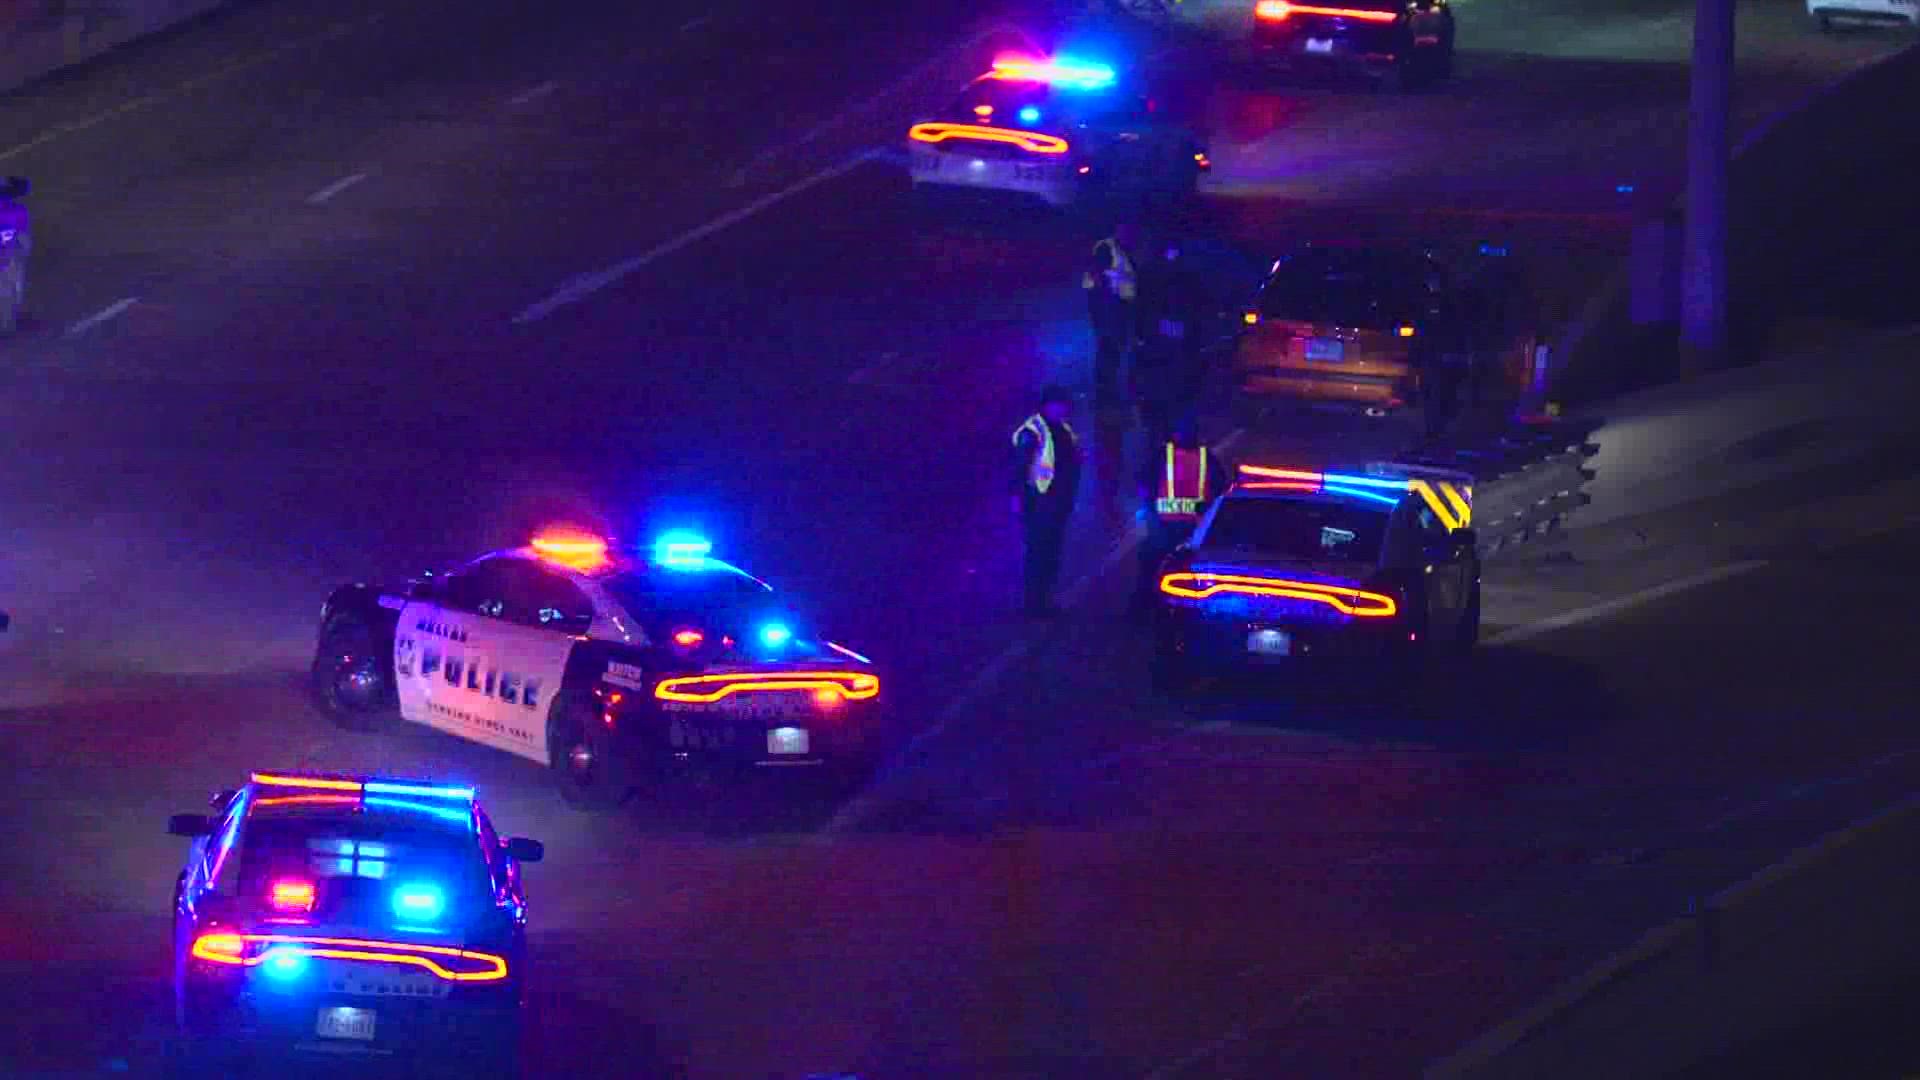 Dallas police say two people in the same vehicle were hit by gunfire on the highway.